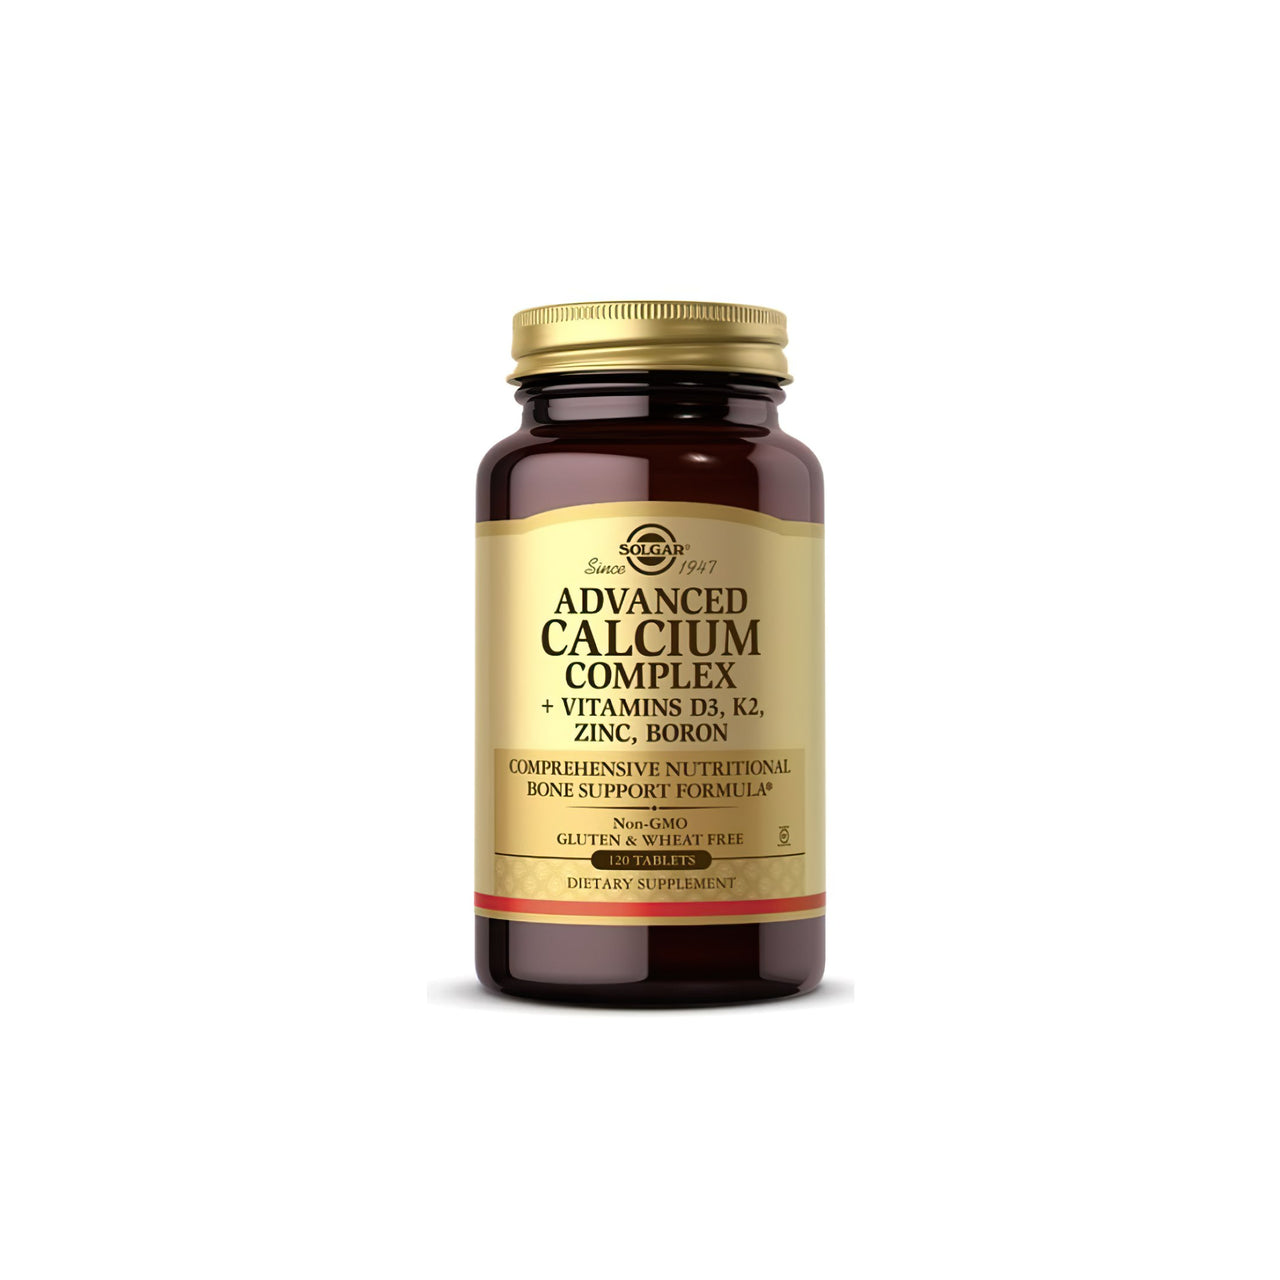 A bottle of Solgar's Advanced Calcium Complex 120 tablets on a white background.